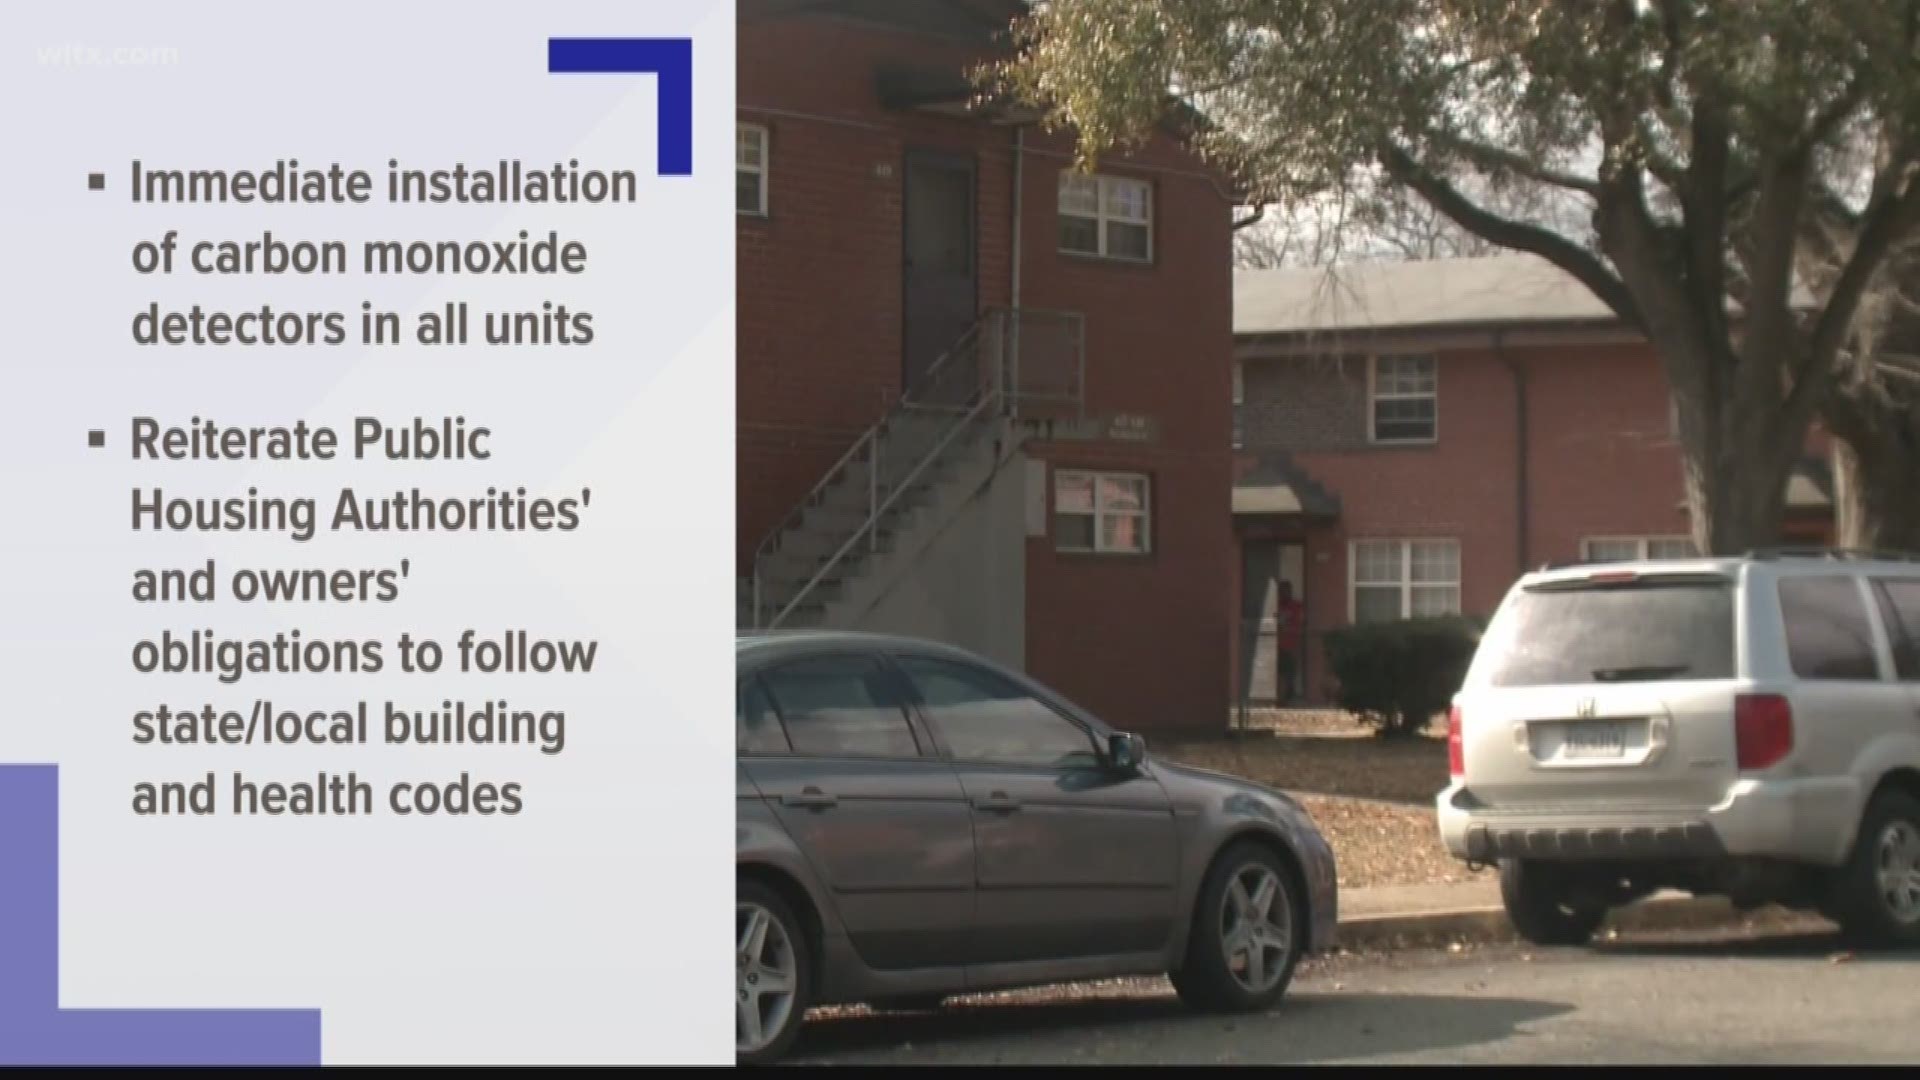 Monday, bills filed in the House and Senate called for carbon monoxide detectors in all public housing units